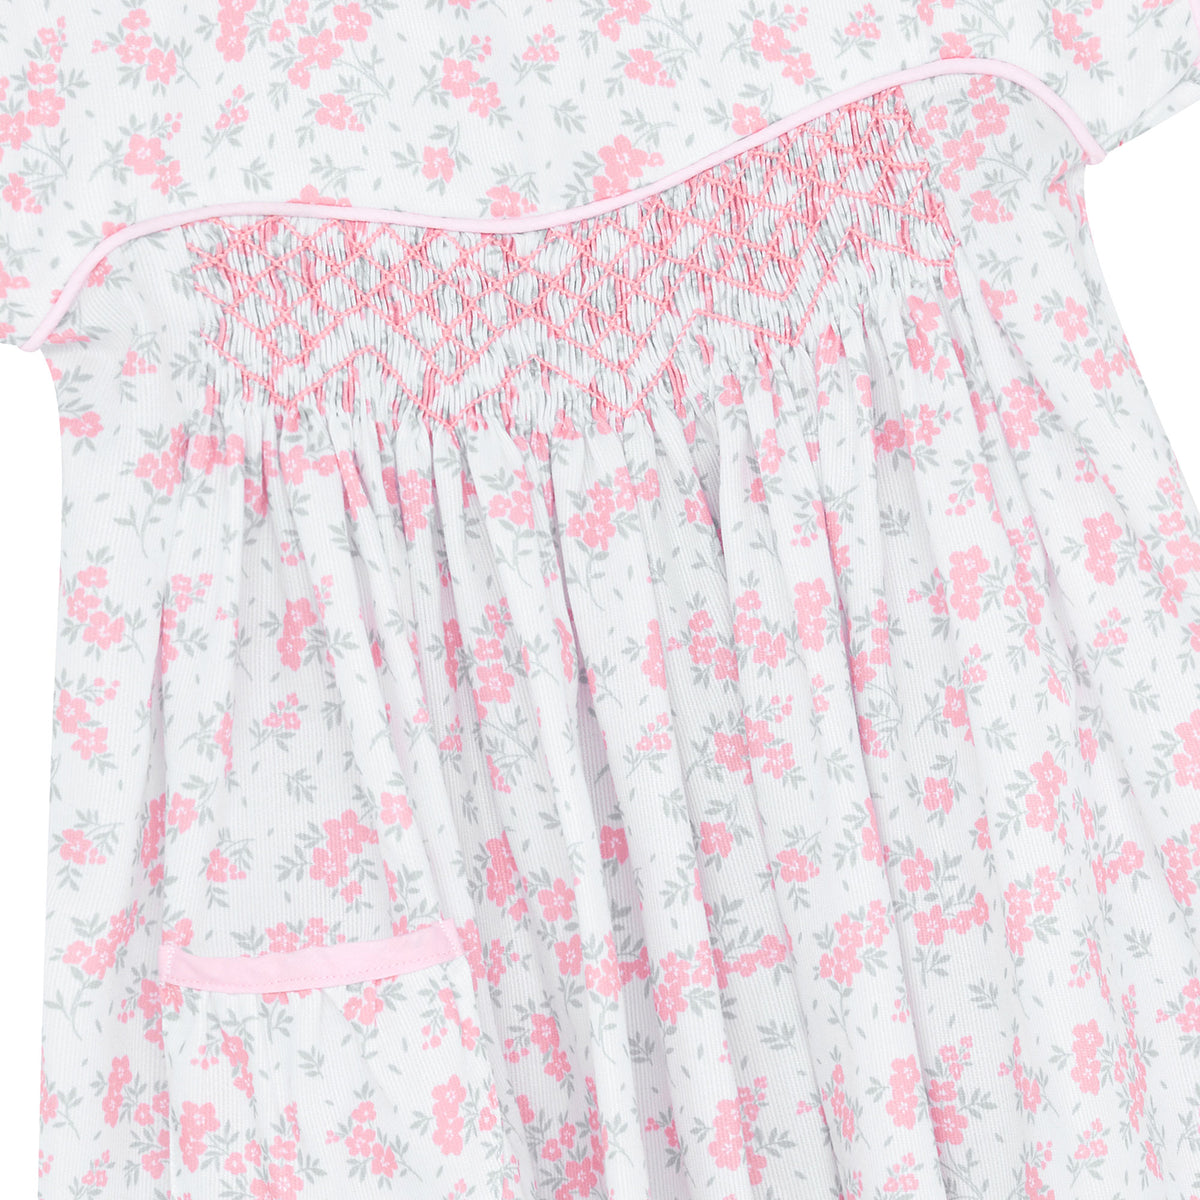 Lilibet Hand Smocked Embroidered Baby Dress Pink | Holly Hastie London